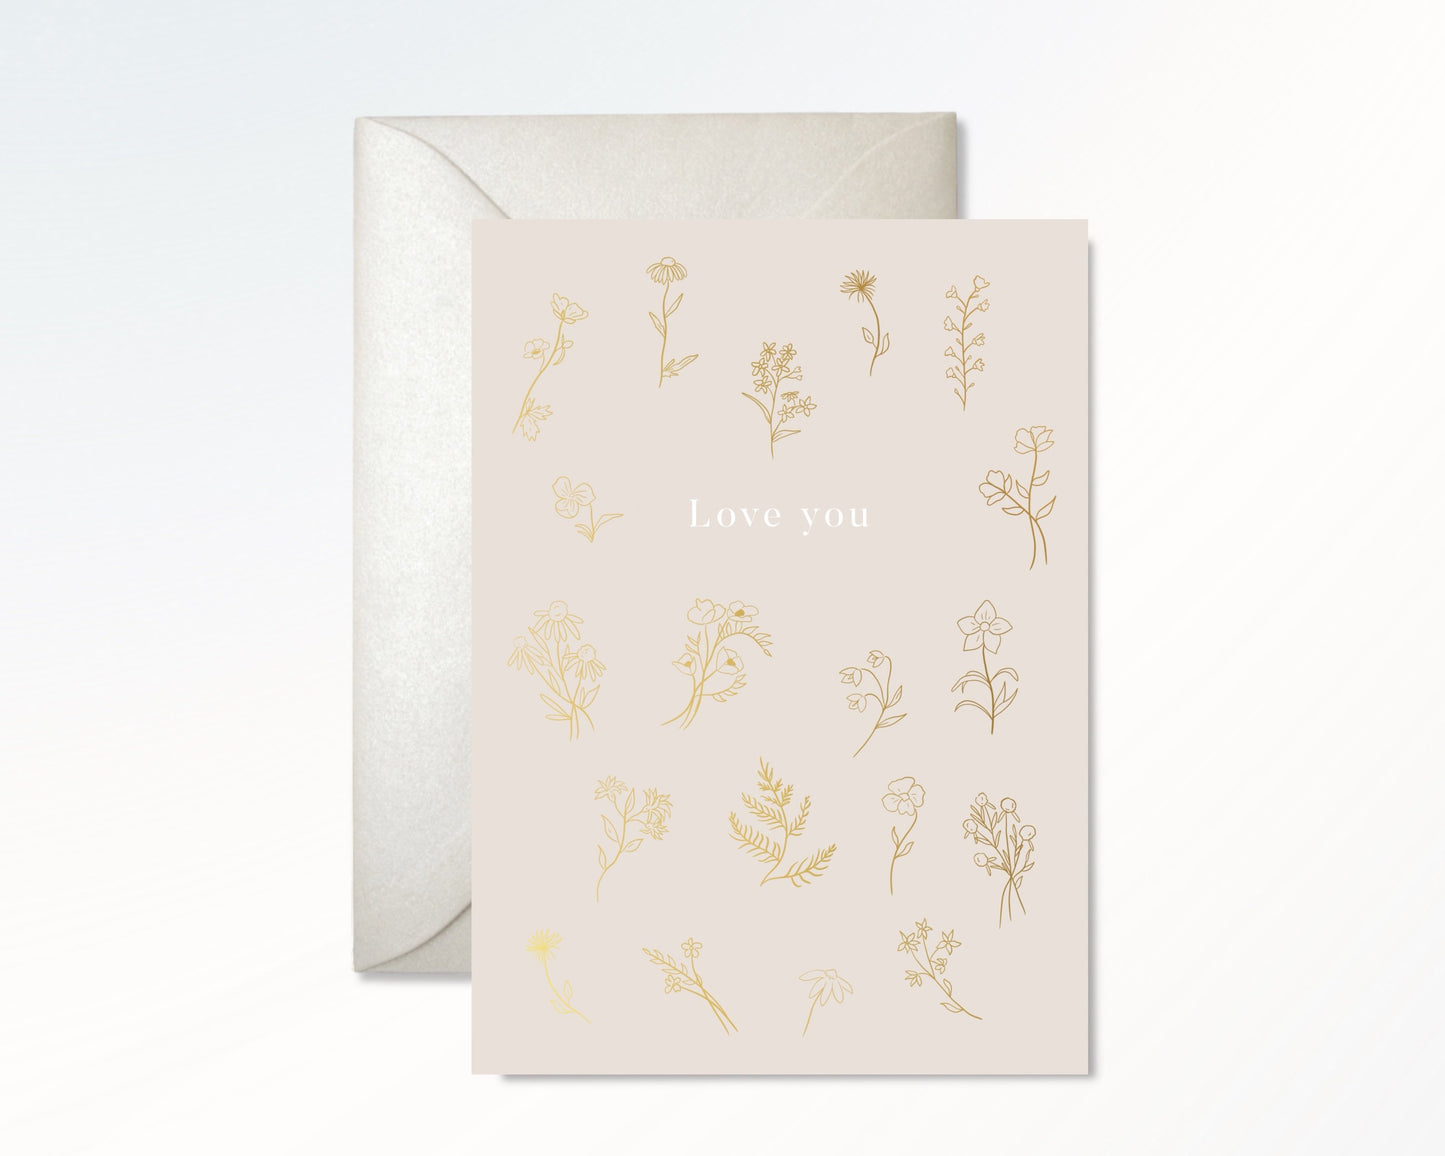 Love You Gold Flowers Card Greeting Cards - Honeypress Design